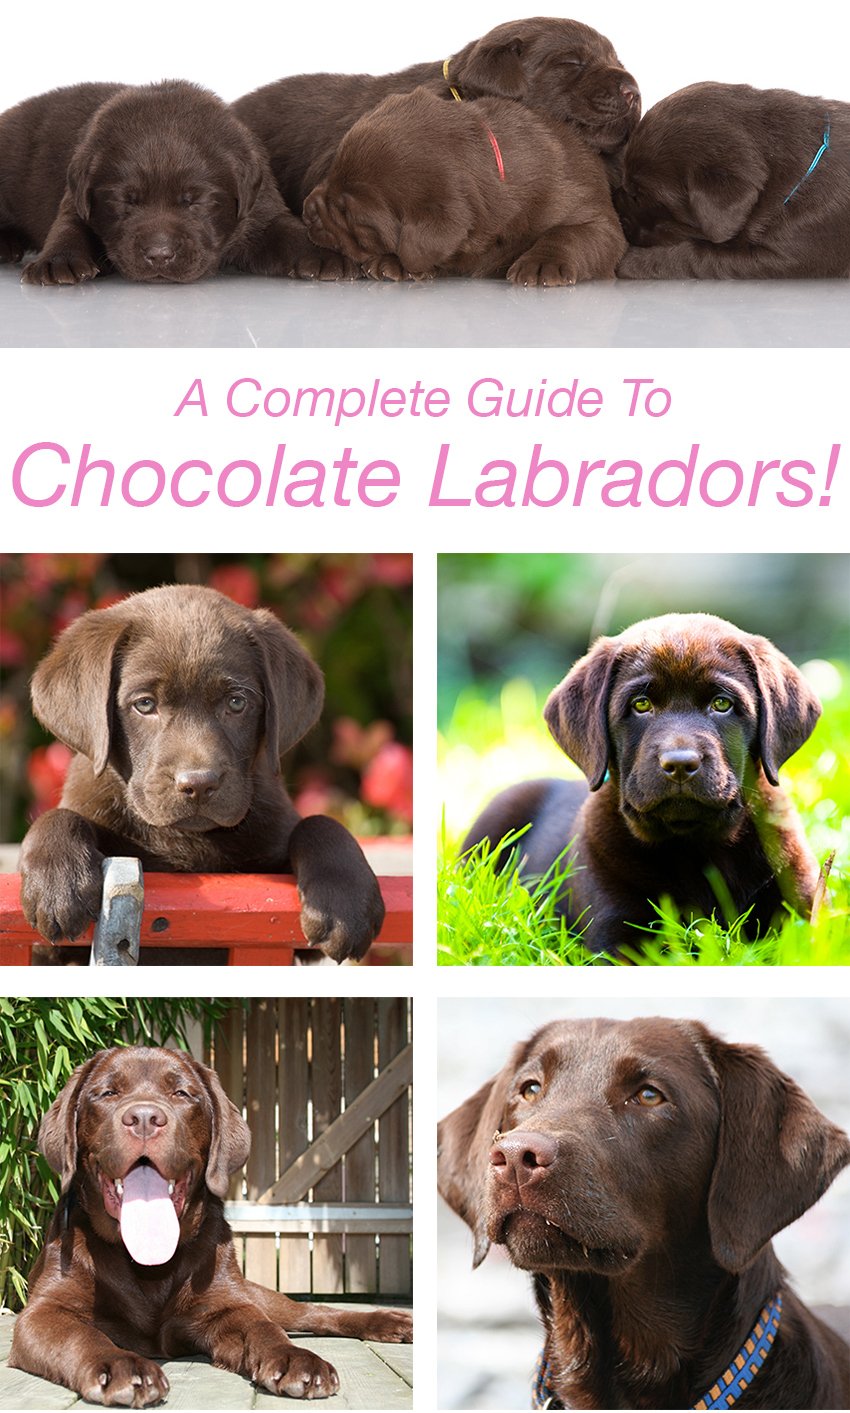 An adorable pile of chocolate Lab puppies - great article for anyone dreaming of a brown puppy